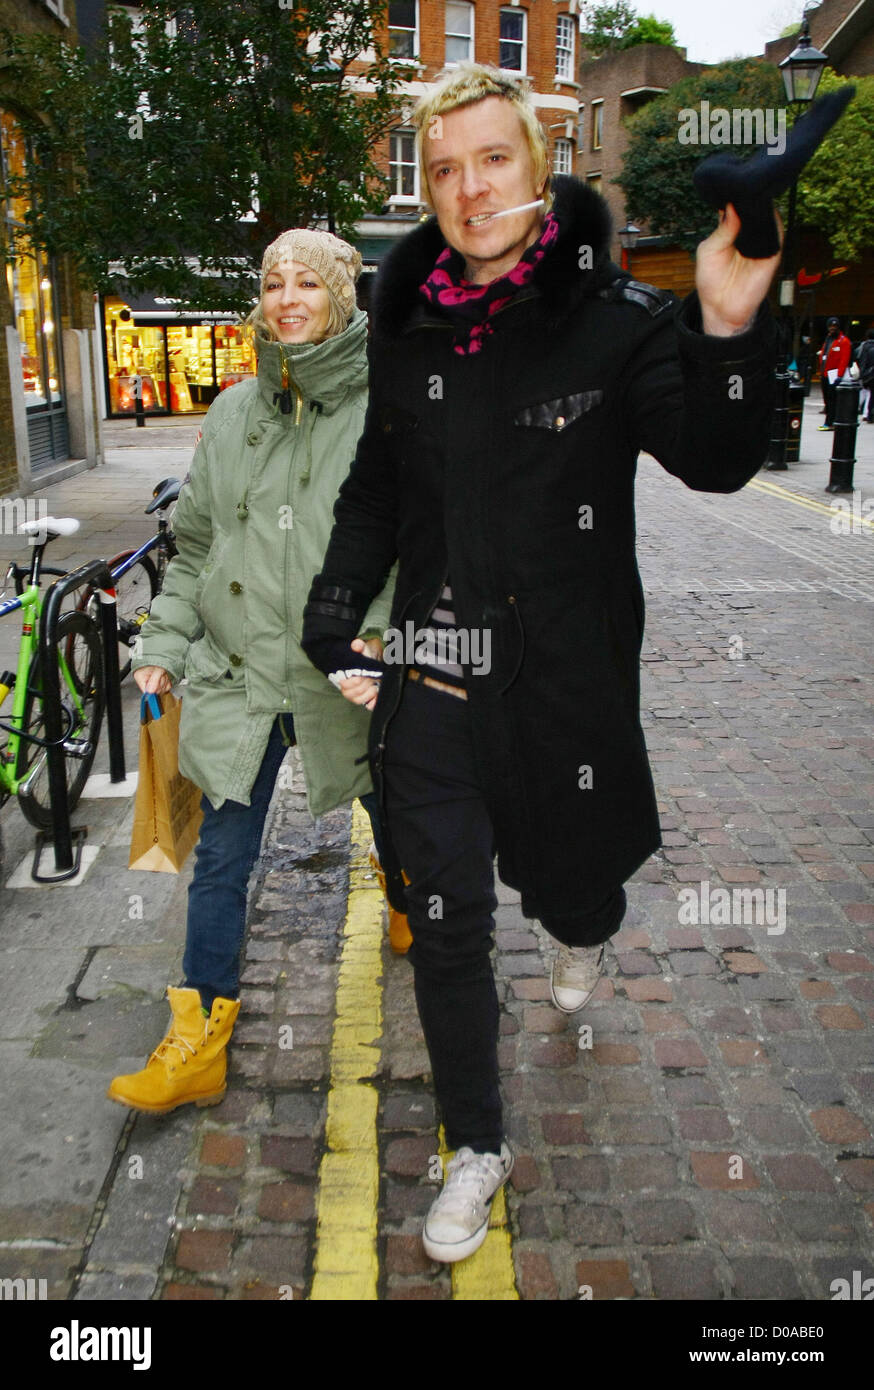 Natalie Appleton and Liam Howlett go shopping together at Urban Outfitters in London London, England - 01.12.10 Stock Photo